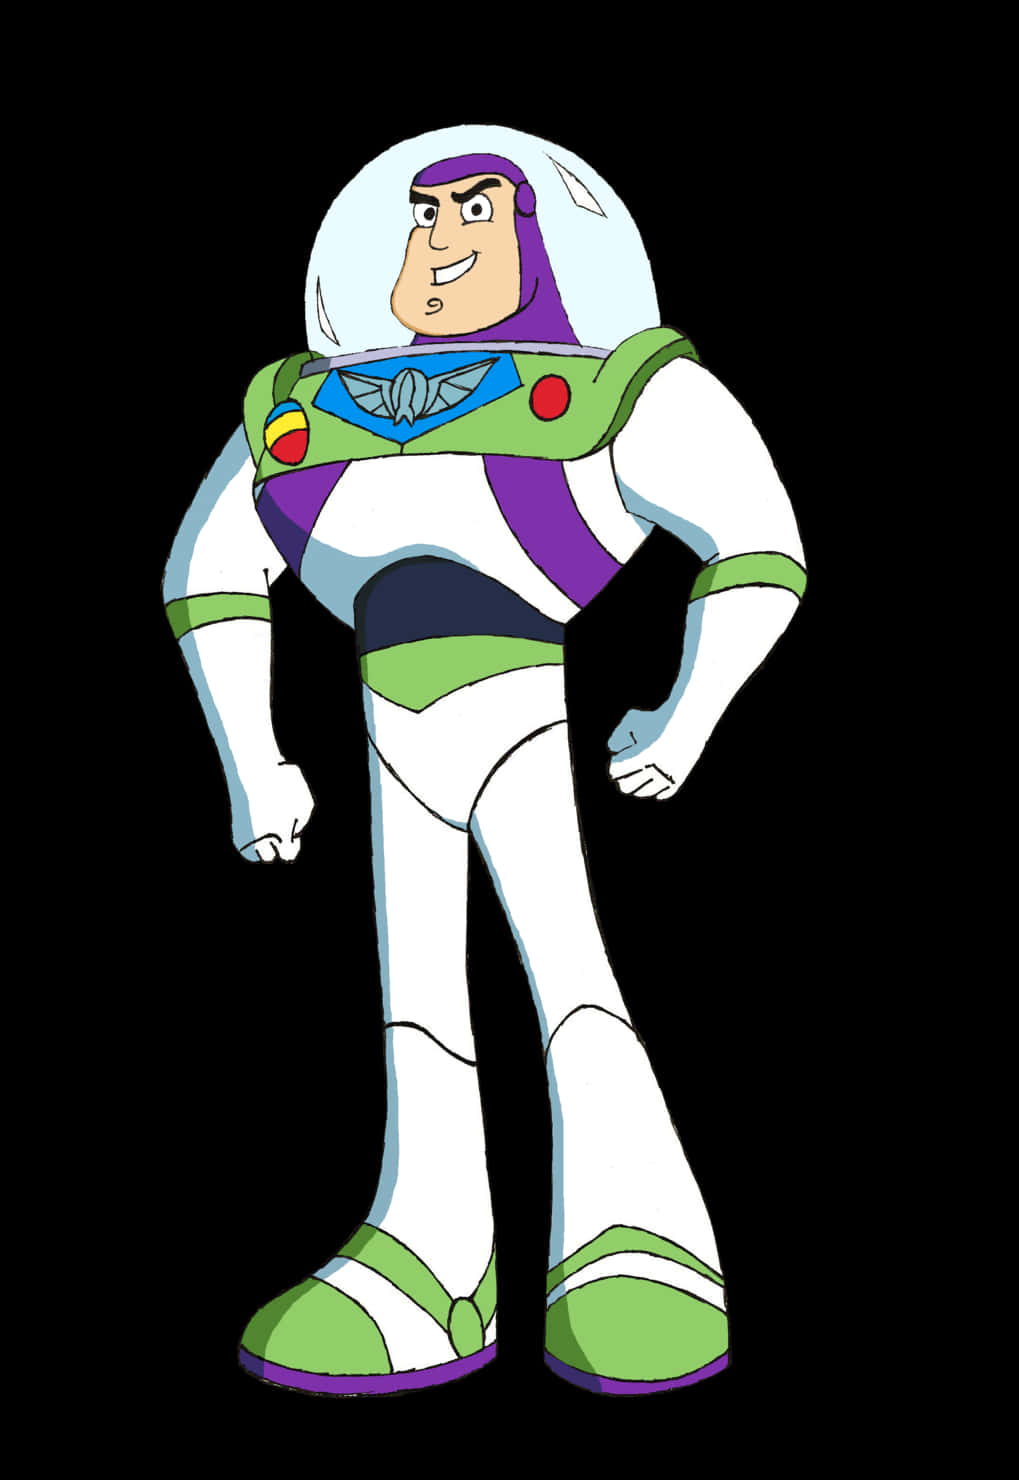 Buzz Lightyear Standing Pose PNG image